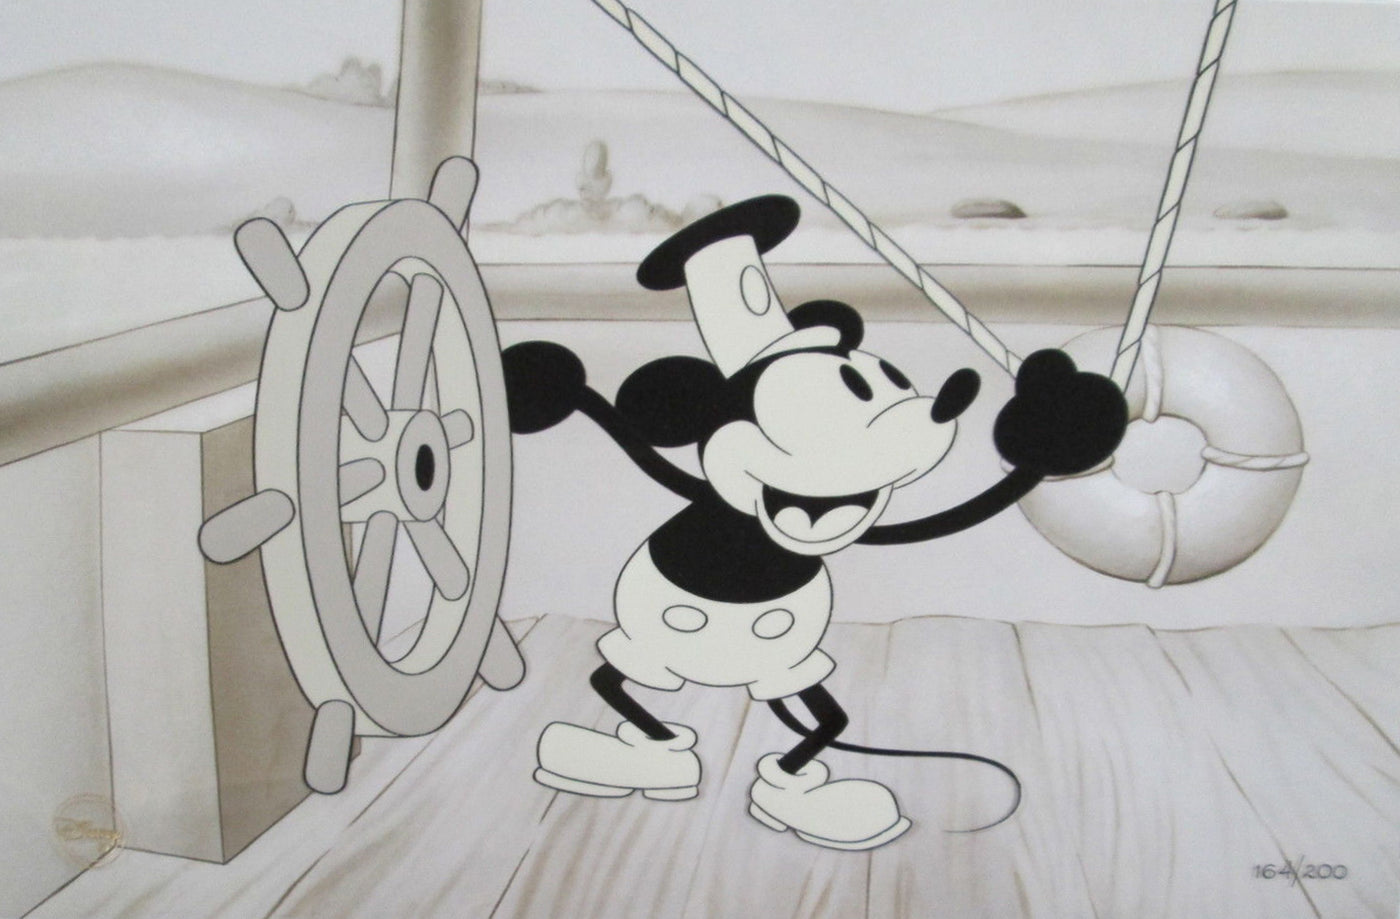 Disney Animation Art Limited Edition Cel "Mickey's Early Years: Steamboat Willie"